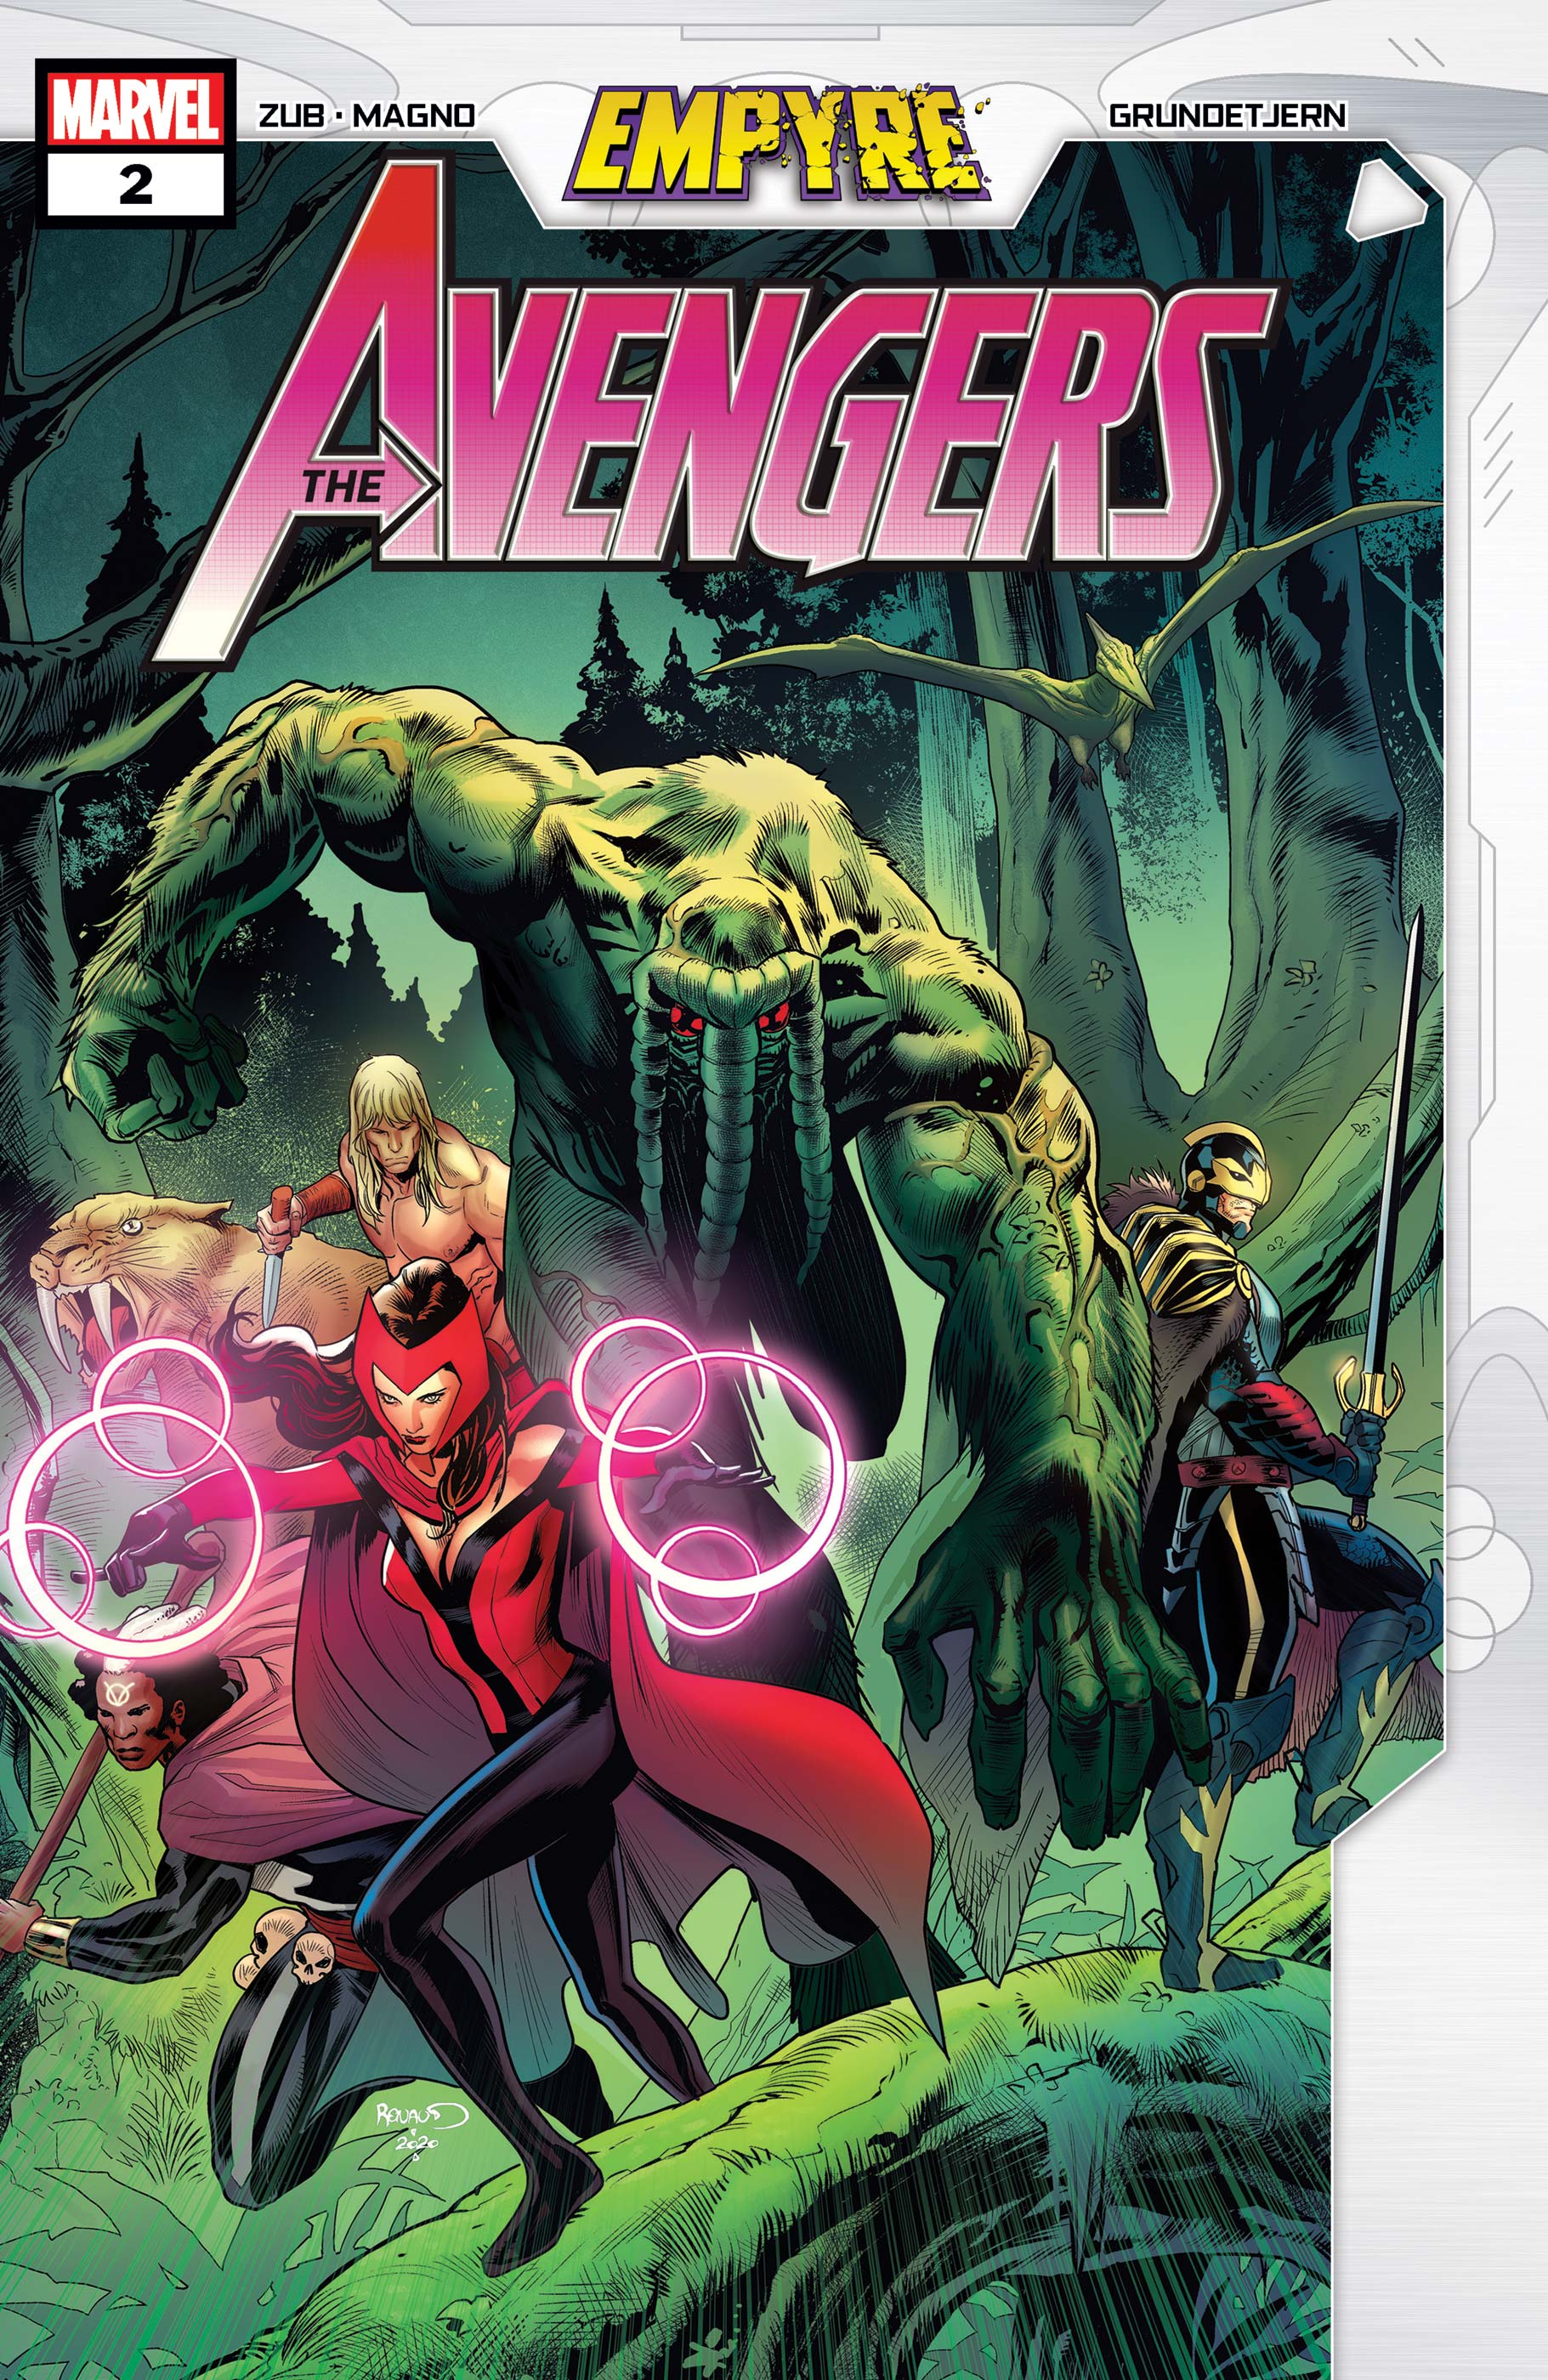 Marvel Empyre: Avengers #1 w/Bag & Board 2020-2 Covers 